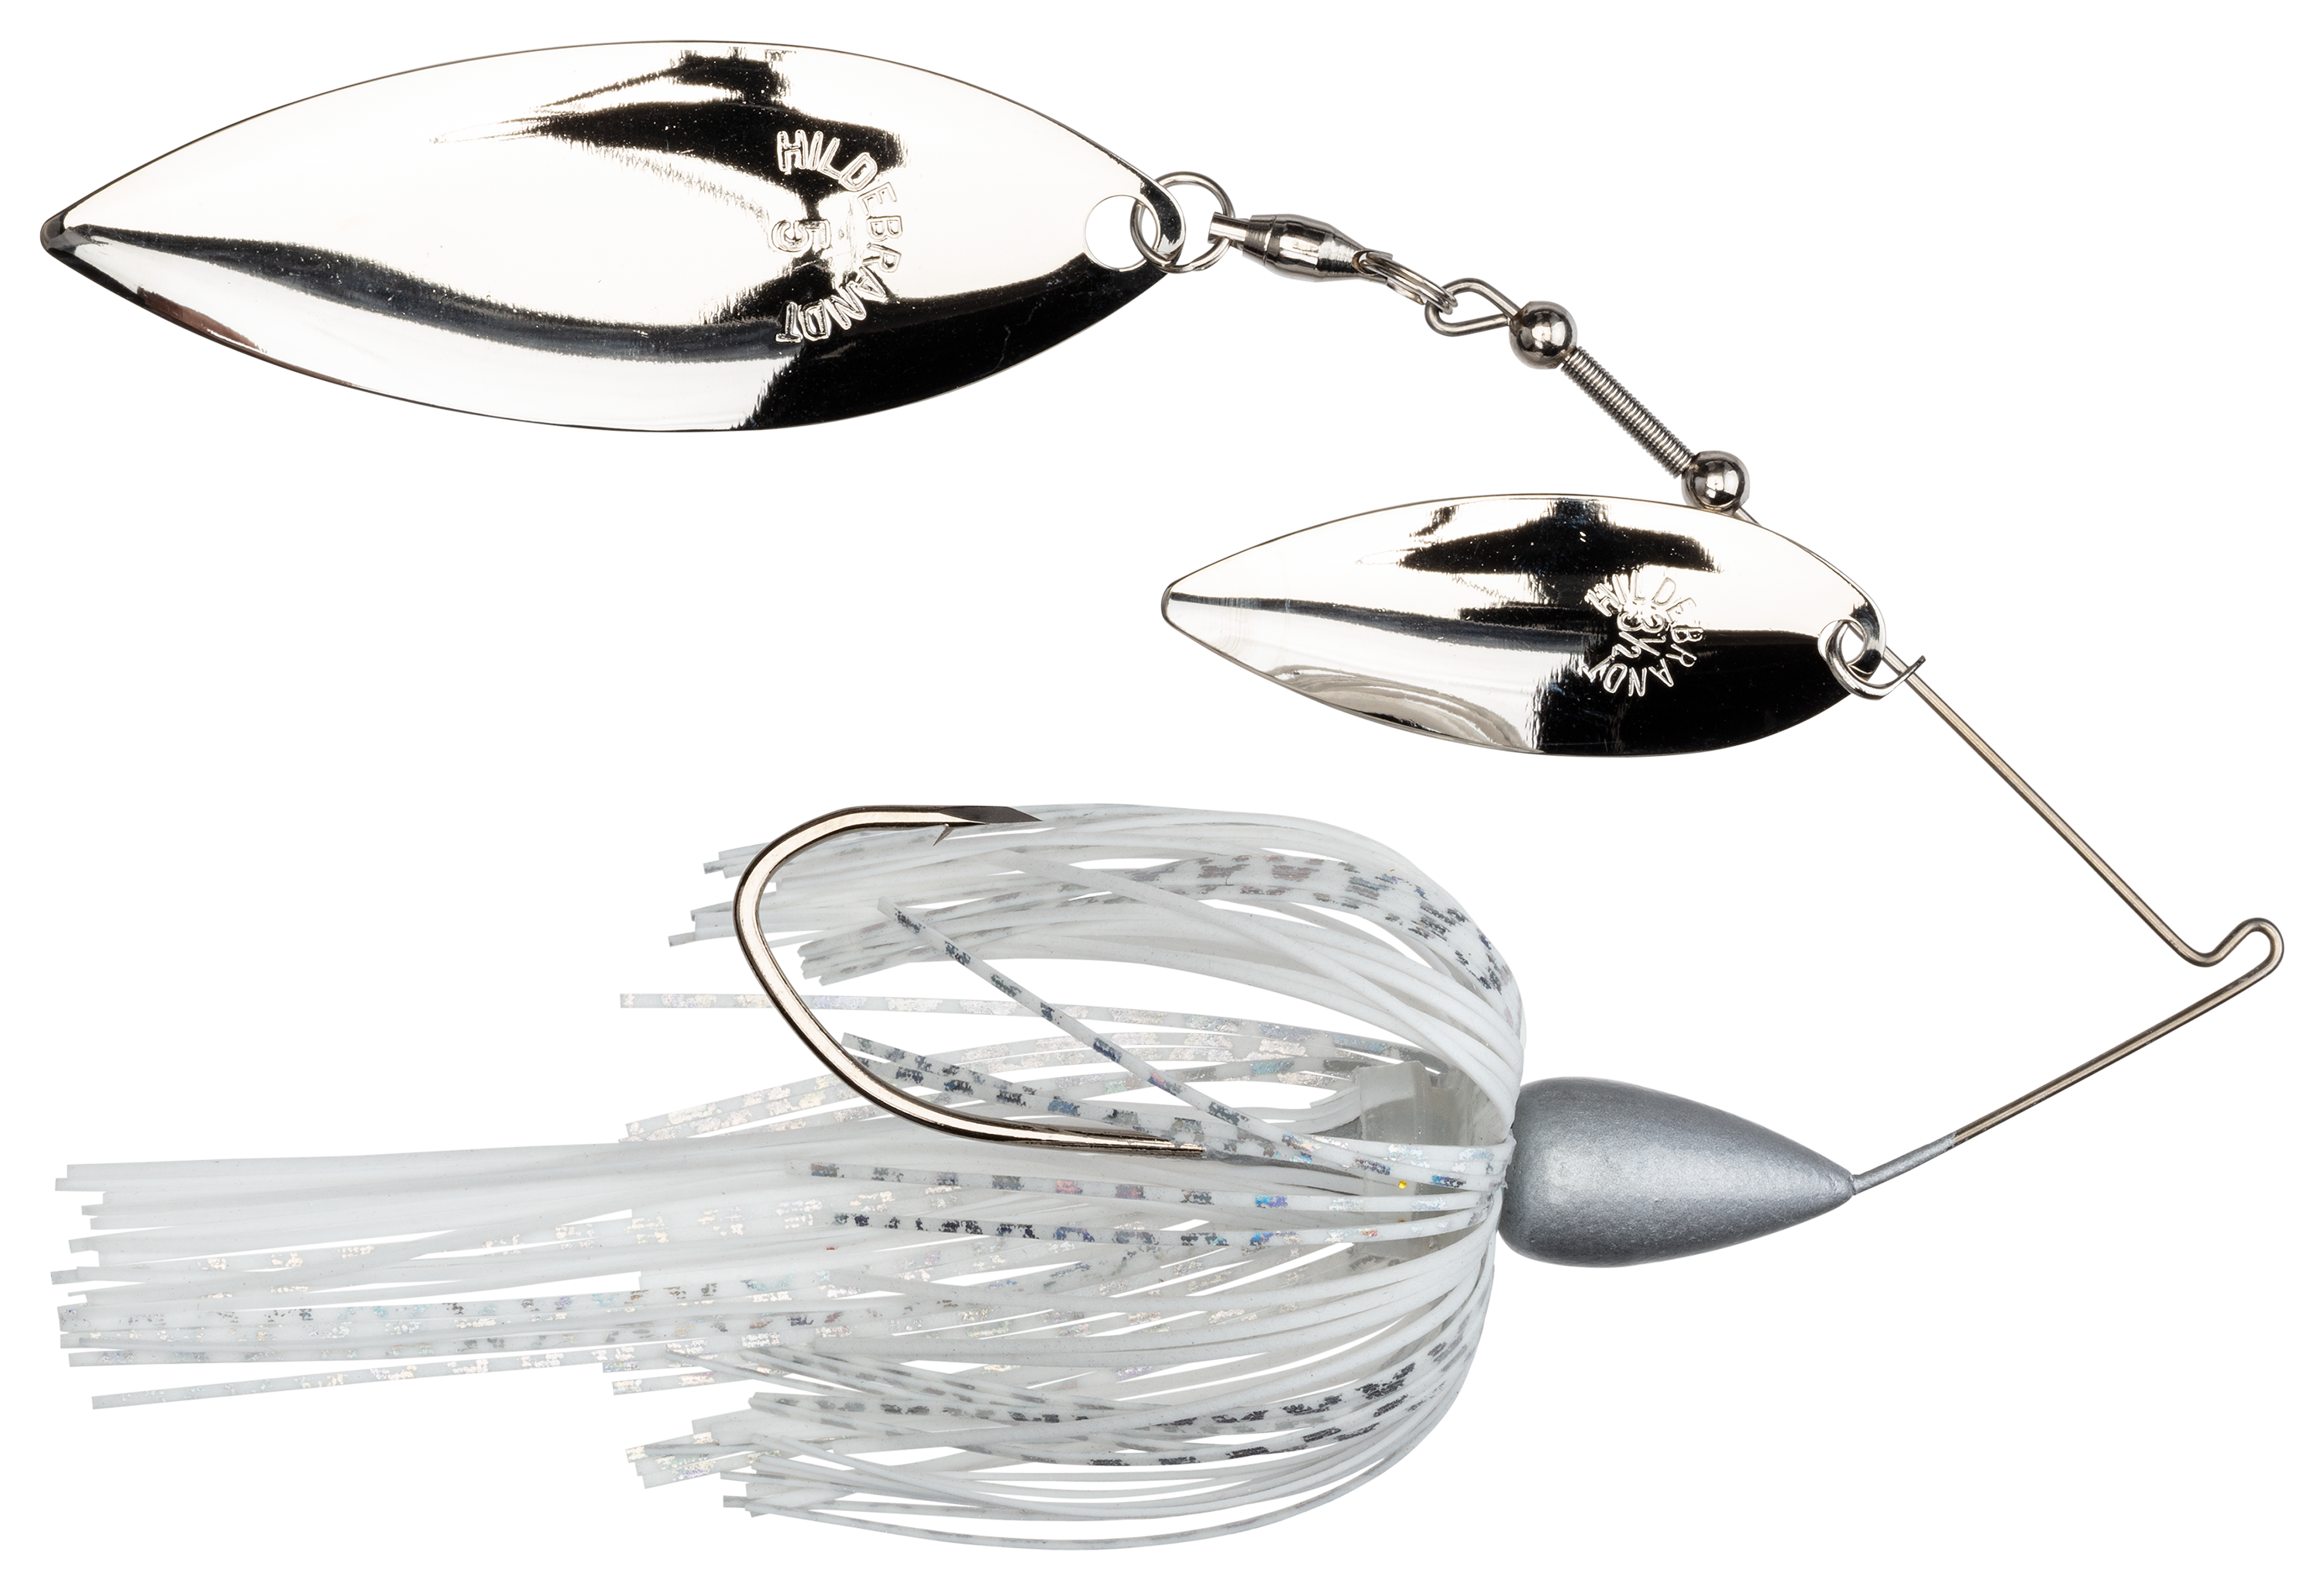 Bass Pro Shops XPS All-American Double-Willow Spinnerbait